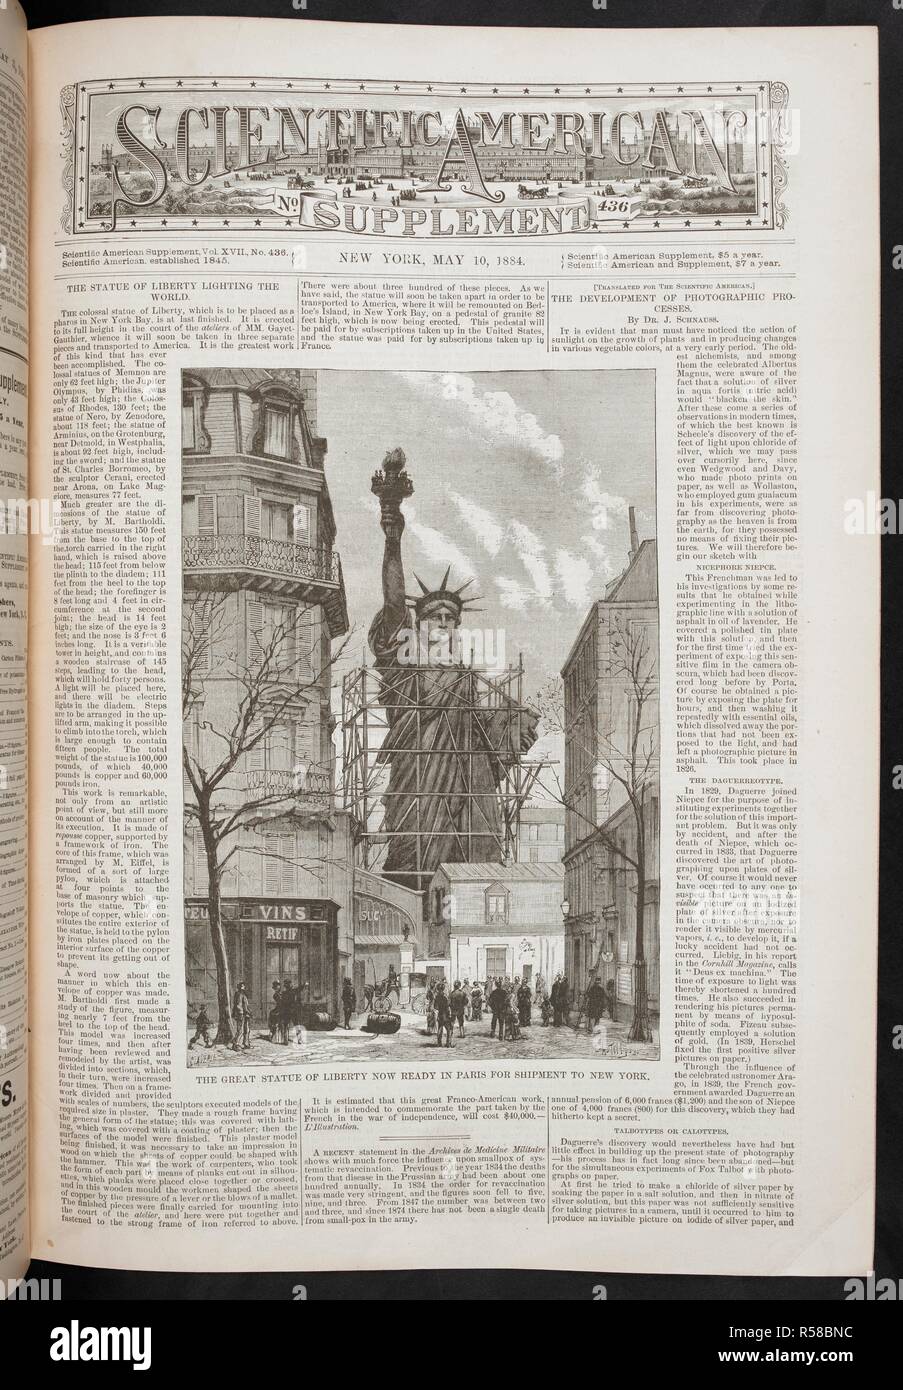 Article on the Statue of Liberty. Illustration showing 'the great Statue of Liberty now ready in Paris for shipment to New York.'  . Scientific American. Supplement. New York : [Munn and Co., etc.] May, 10,1884. Source: P.P.1612.fa, vol.XVII, no.436. Stock Photo